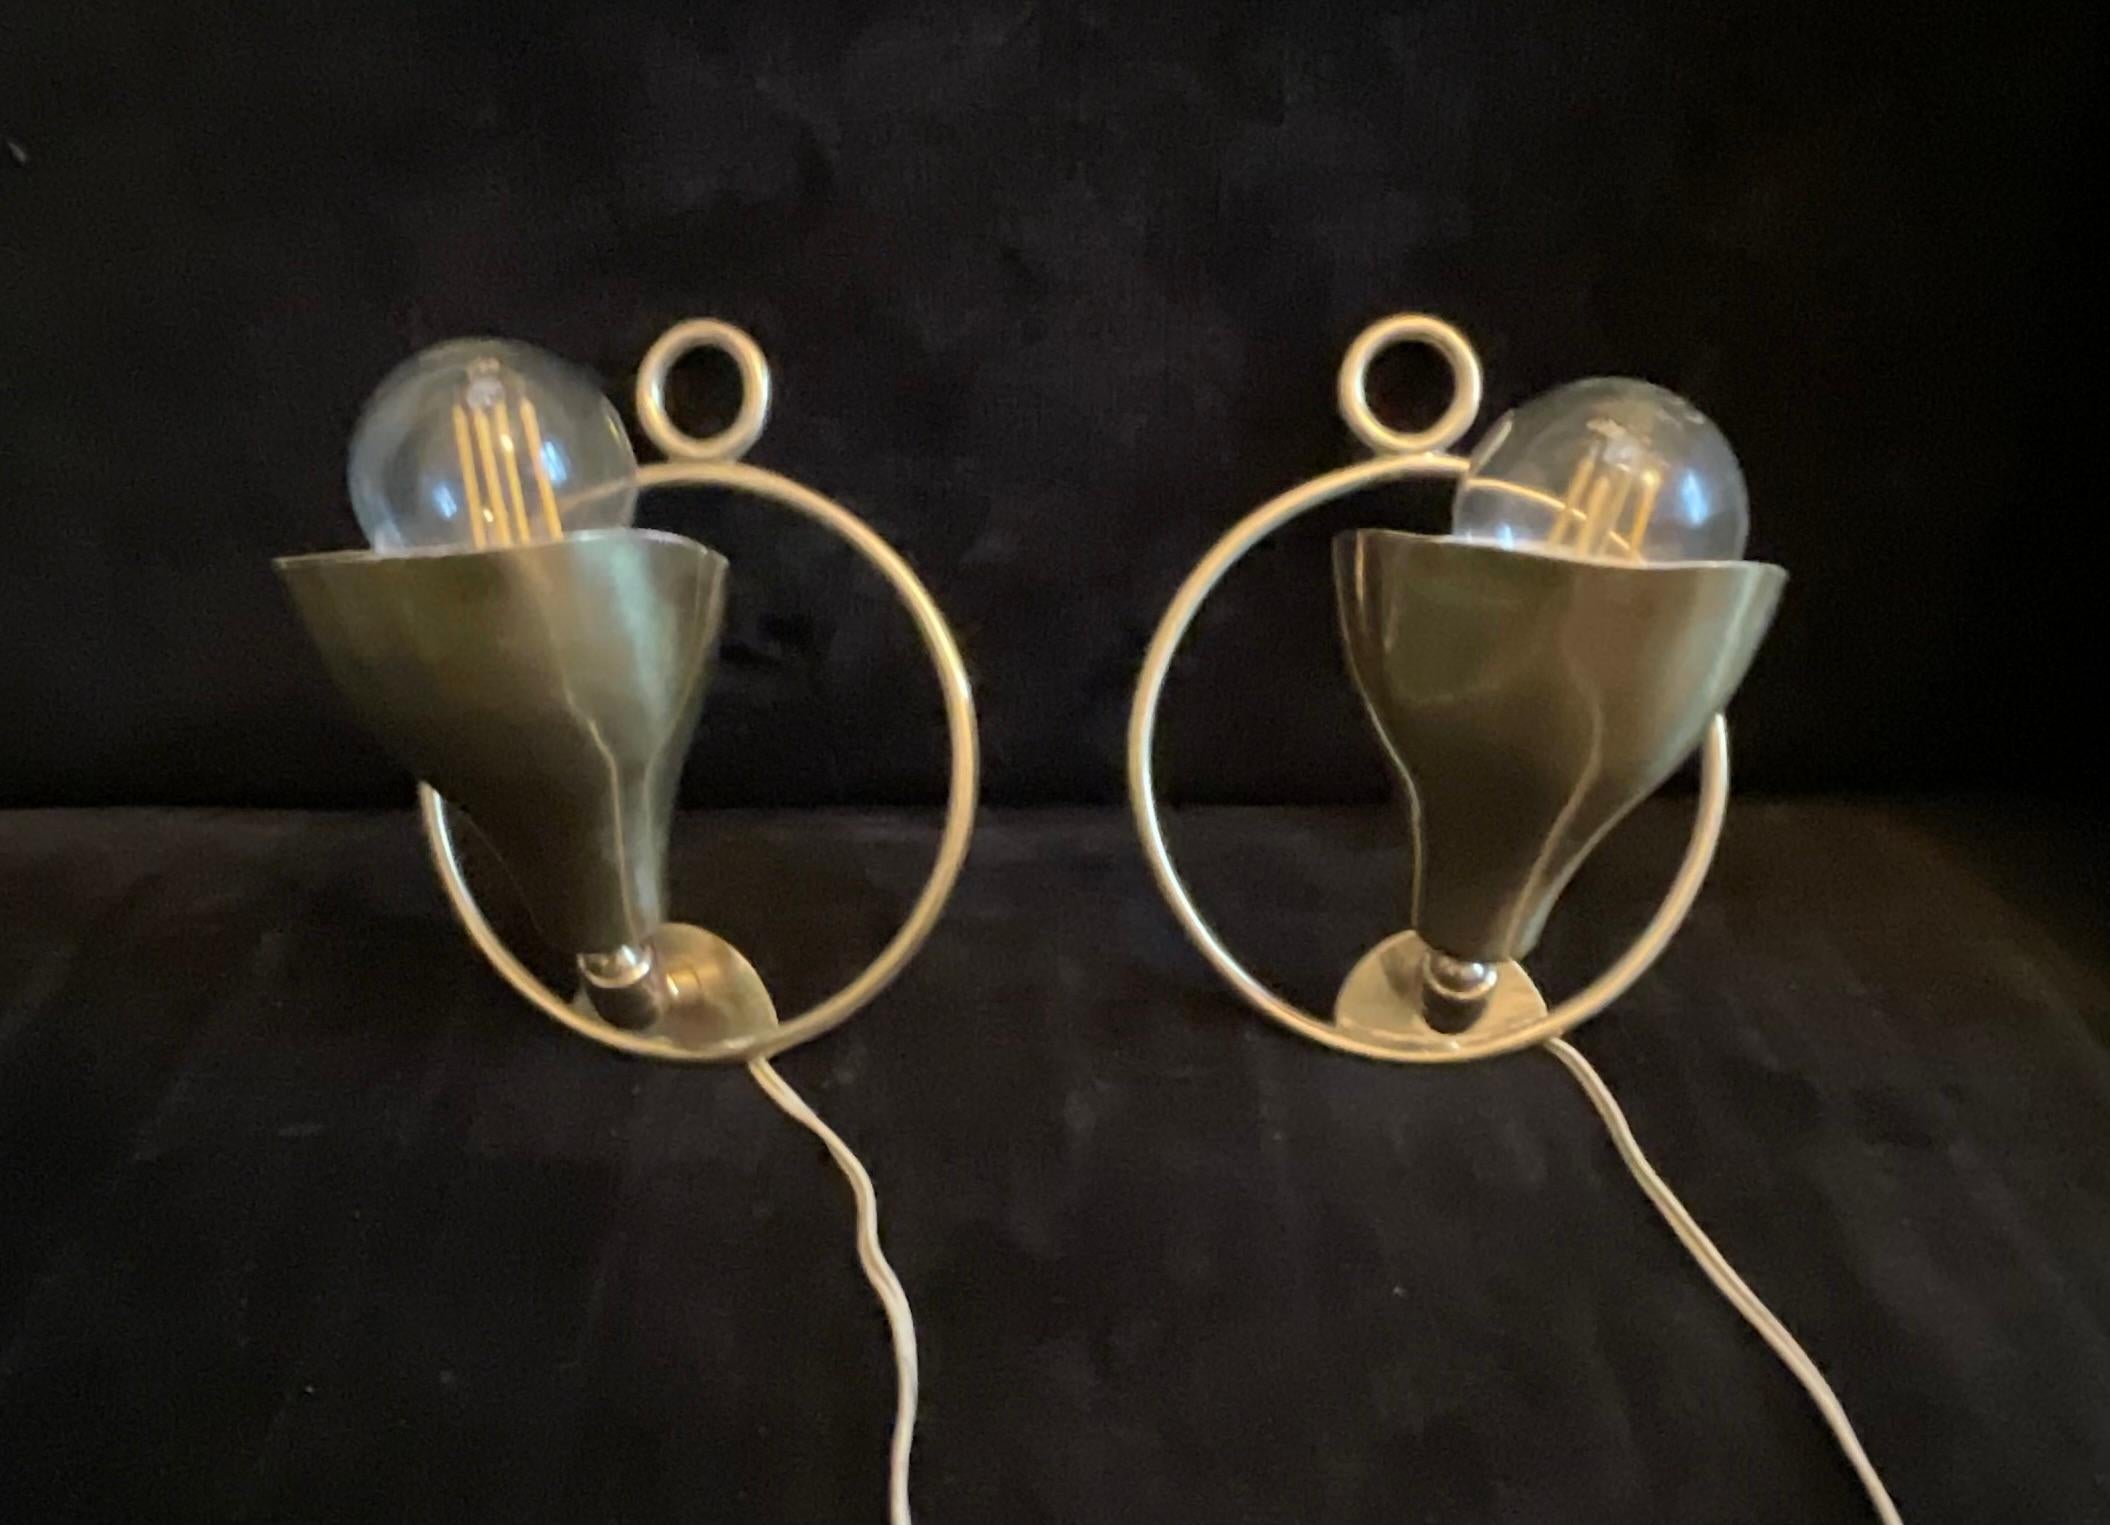 SARFATTI Gino - ARTELUCE -Pair of brass wall or floor sconces  For Sale 3